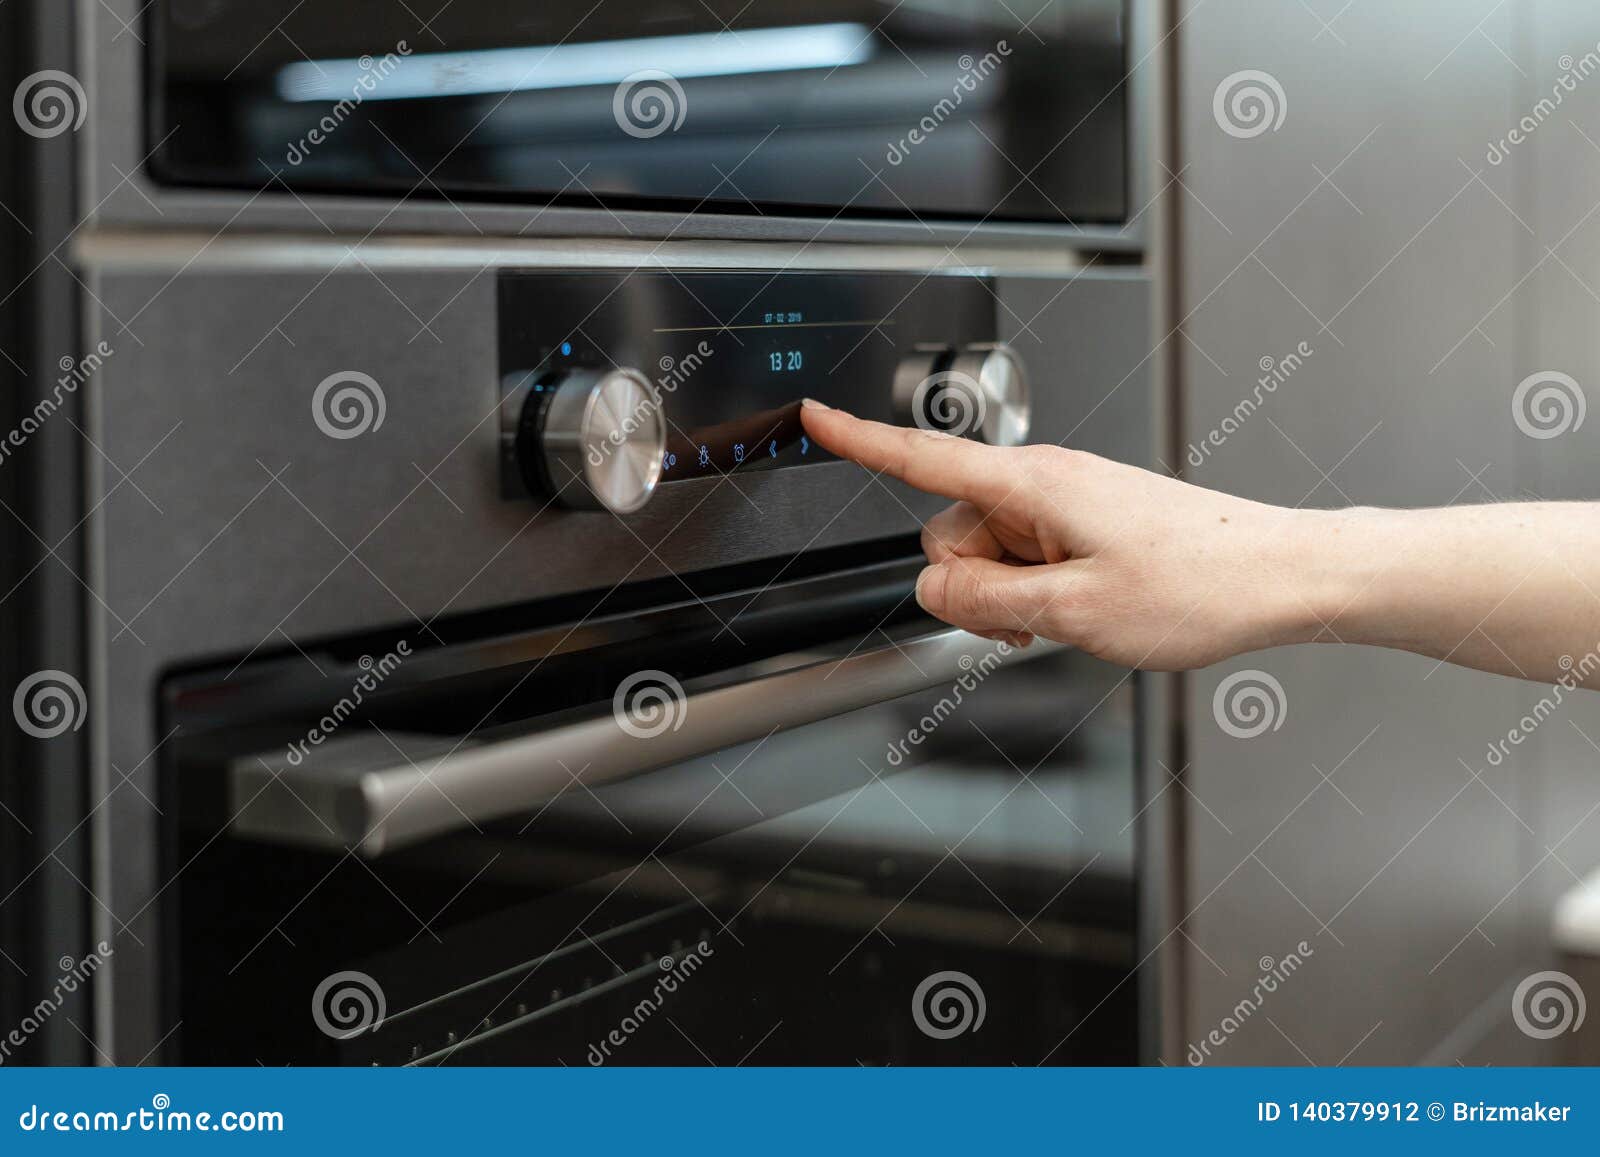 woman hand choose program on electronic control panel built-in oven